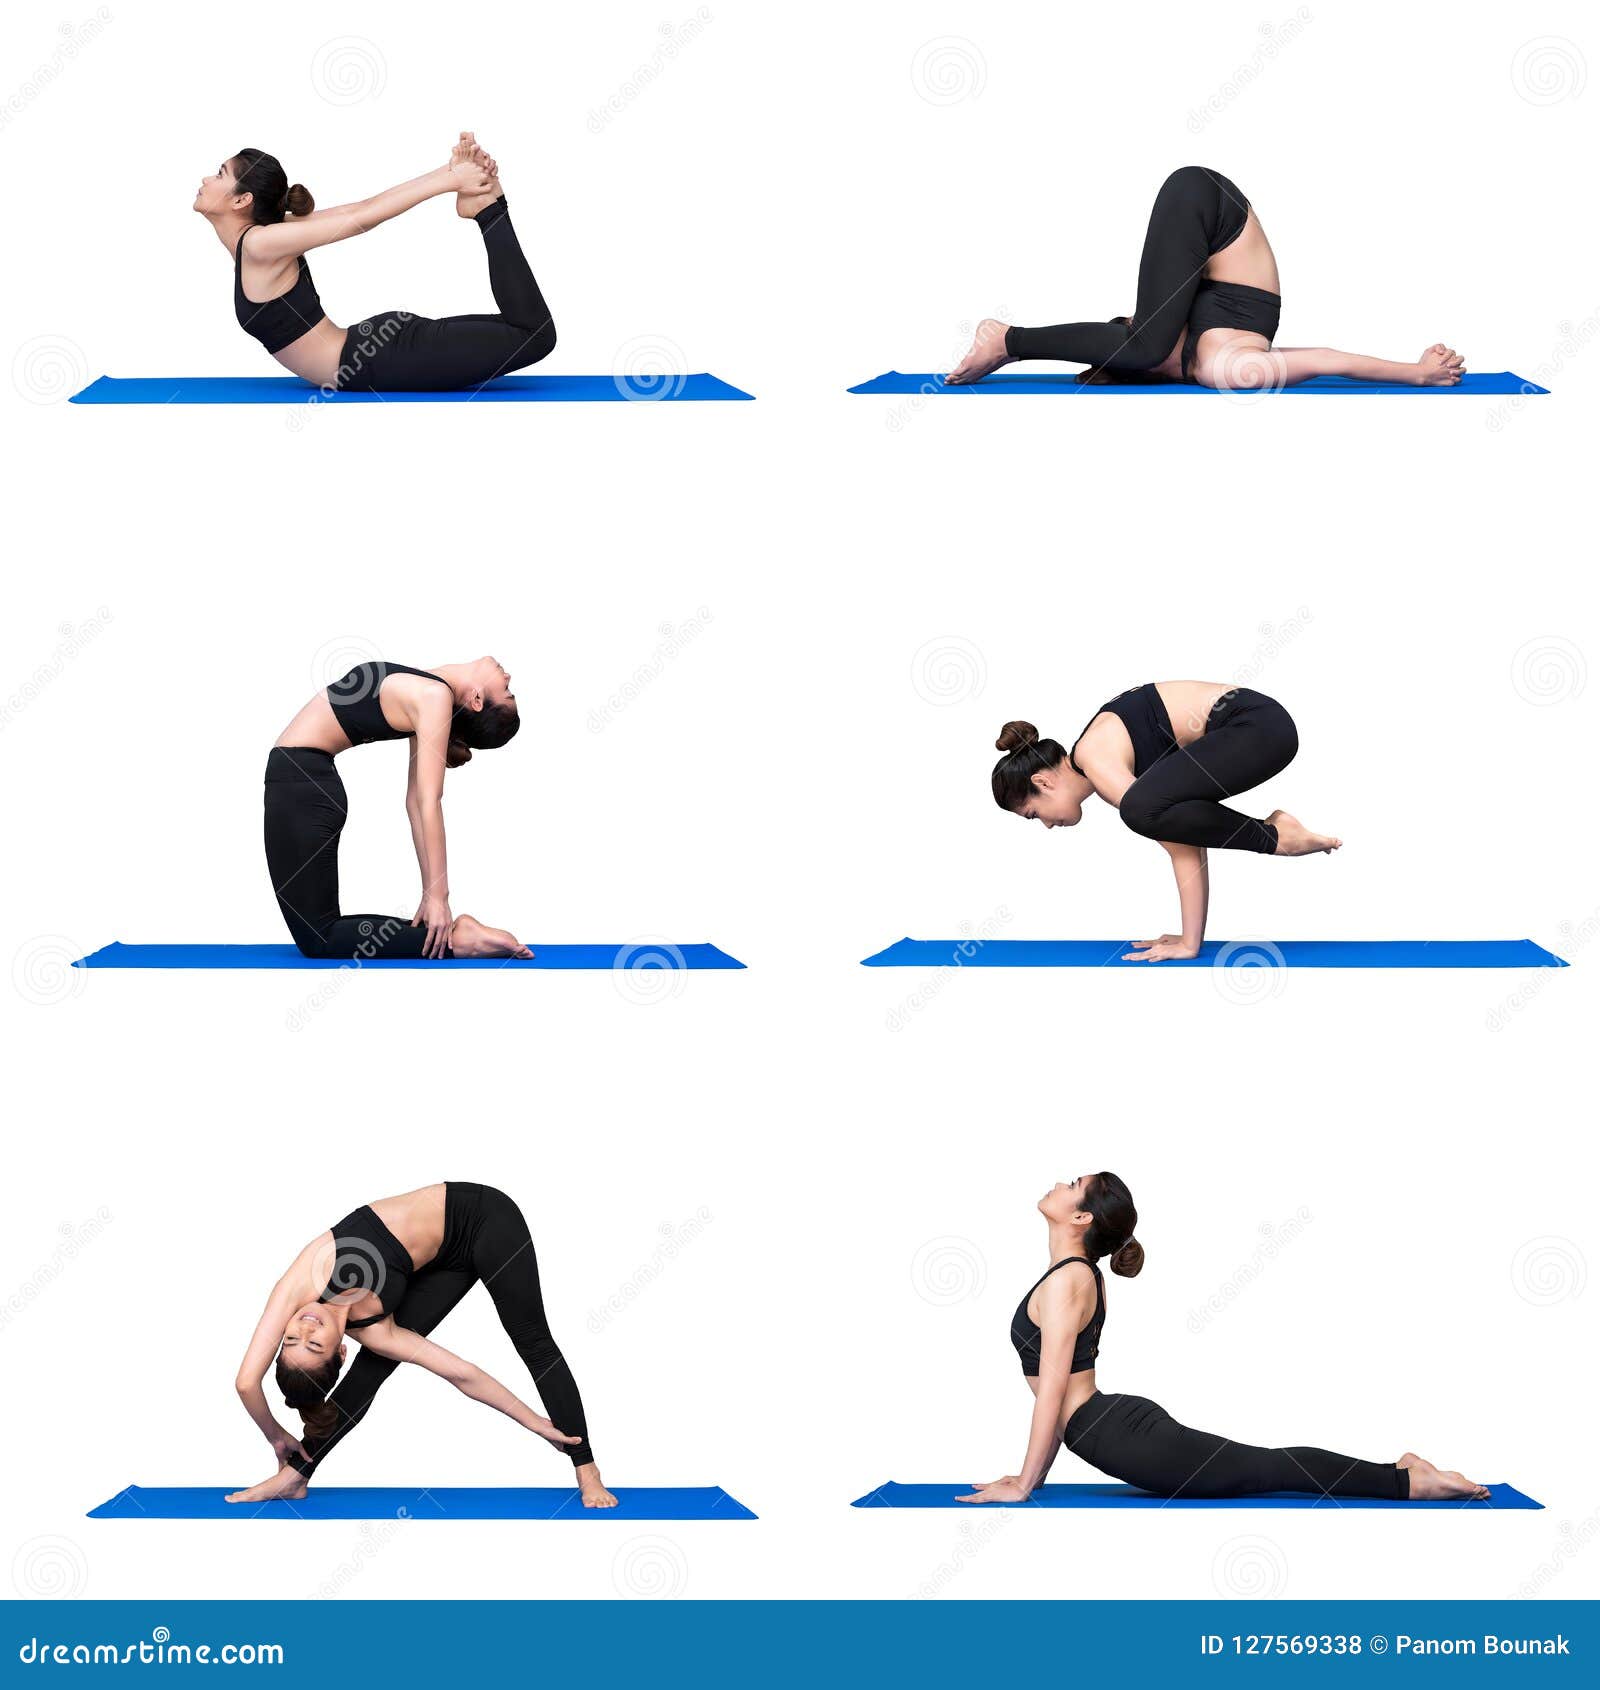 Improve your yoga practise and lose that stubborn tummy fat! 🧘‍♂️💥 In  order to find your inner power, try these poses. #yoga... | Instagram